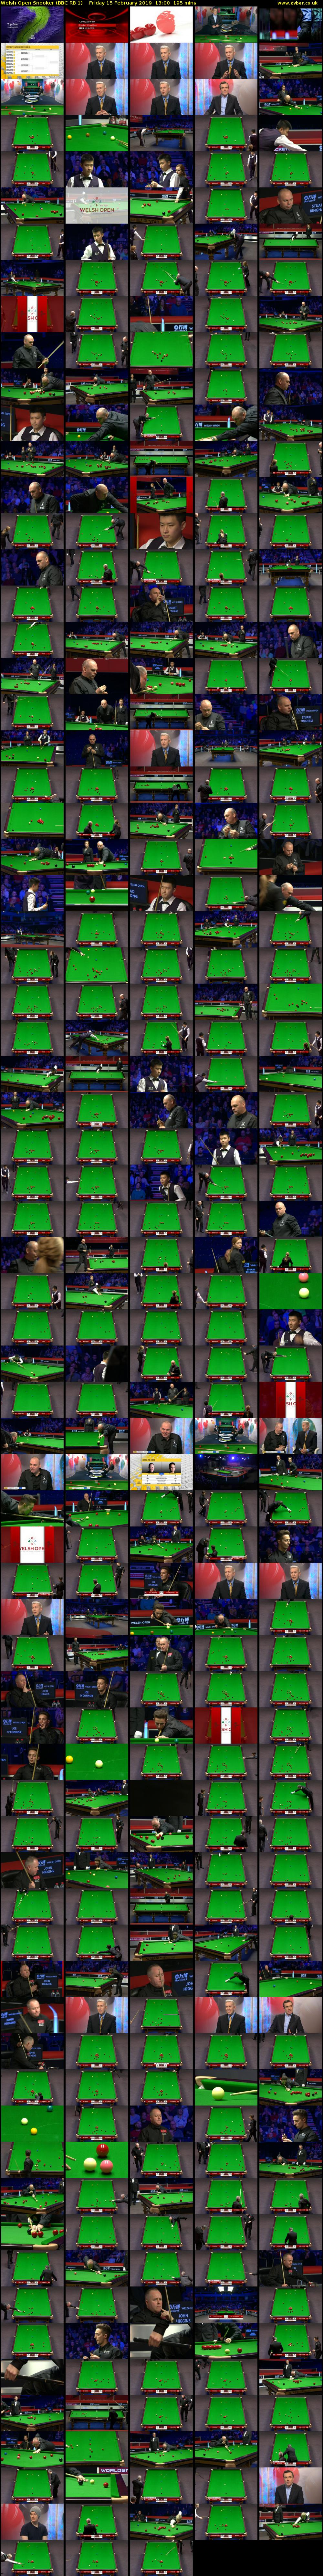 Welsh Open Snooker (BBC RB 1) Friday 15 February 2019 13:00 - 16:15